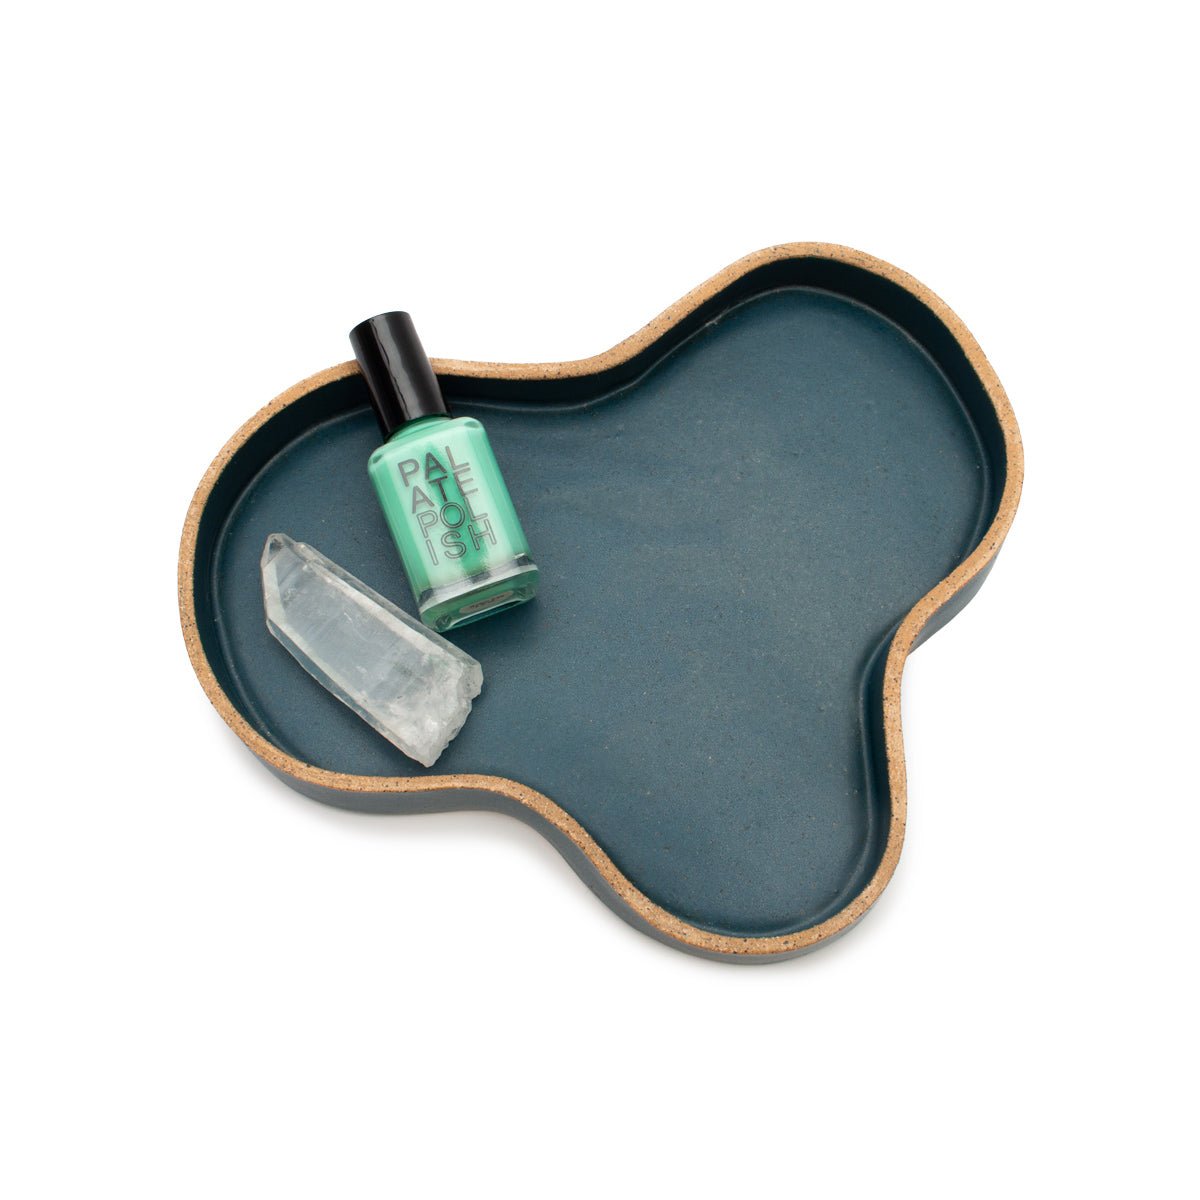 A blob tray holding a bottle of nail polish and a quartz crystal. The Blob Tray in Blue is designed and handmade by Kohai Ceramics in Portland, OR.